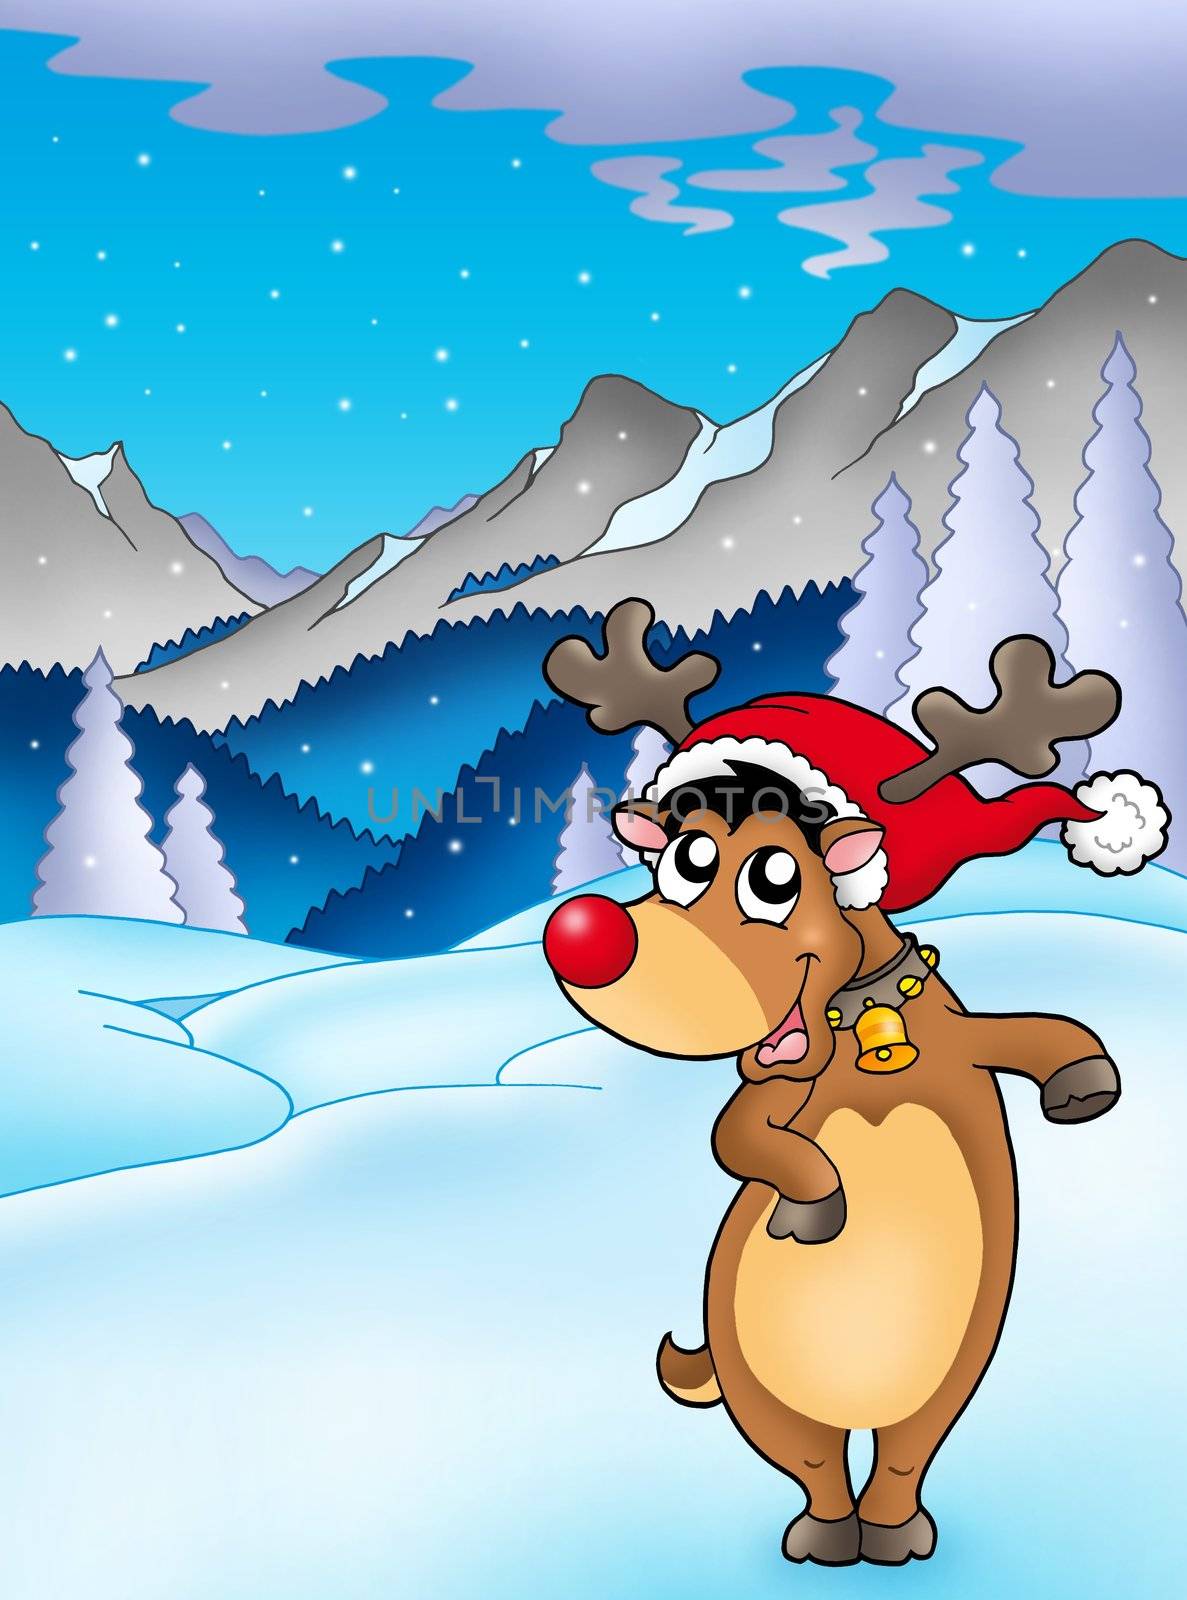 Christmas theme with happy reindeer - color illustration.